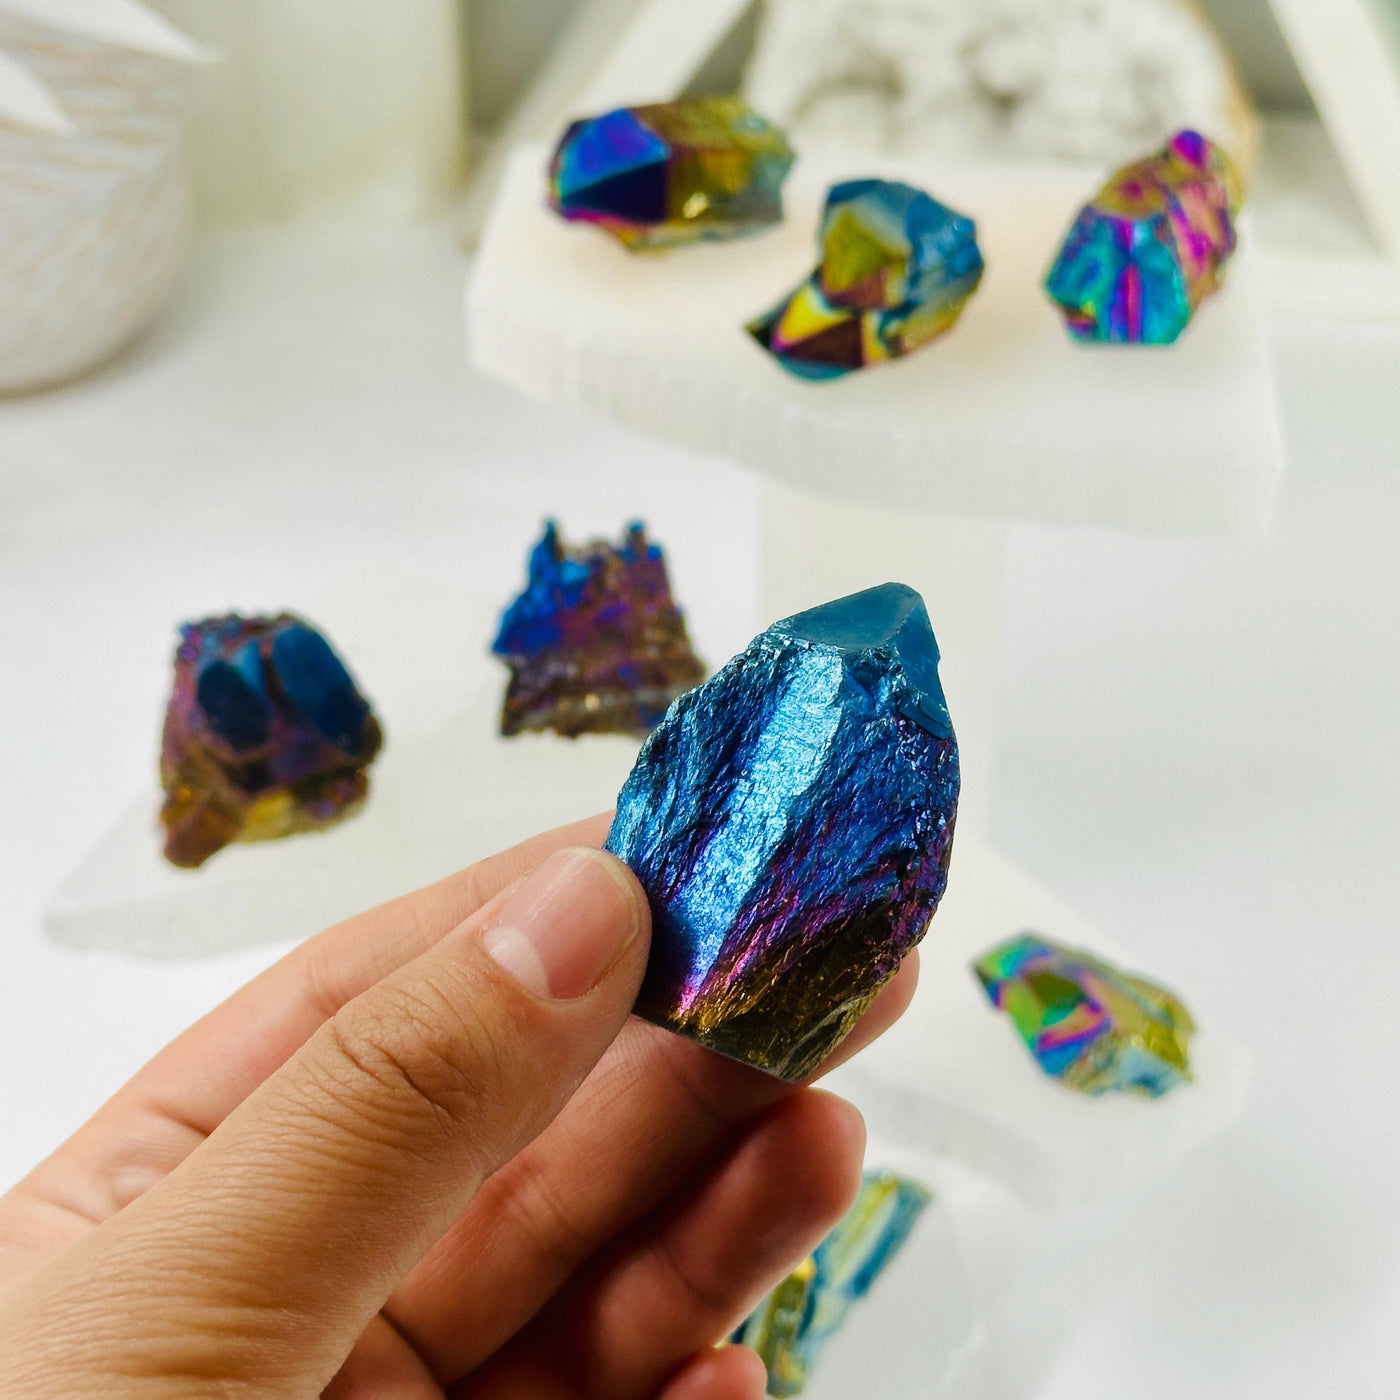 Rainbow Titanium Coated Amethyst Crystal Cluster - You Choose variant 4 in hand for size reference with other variants in background